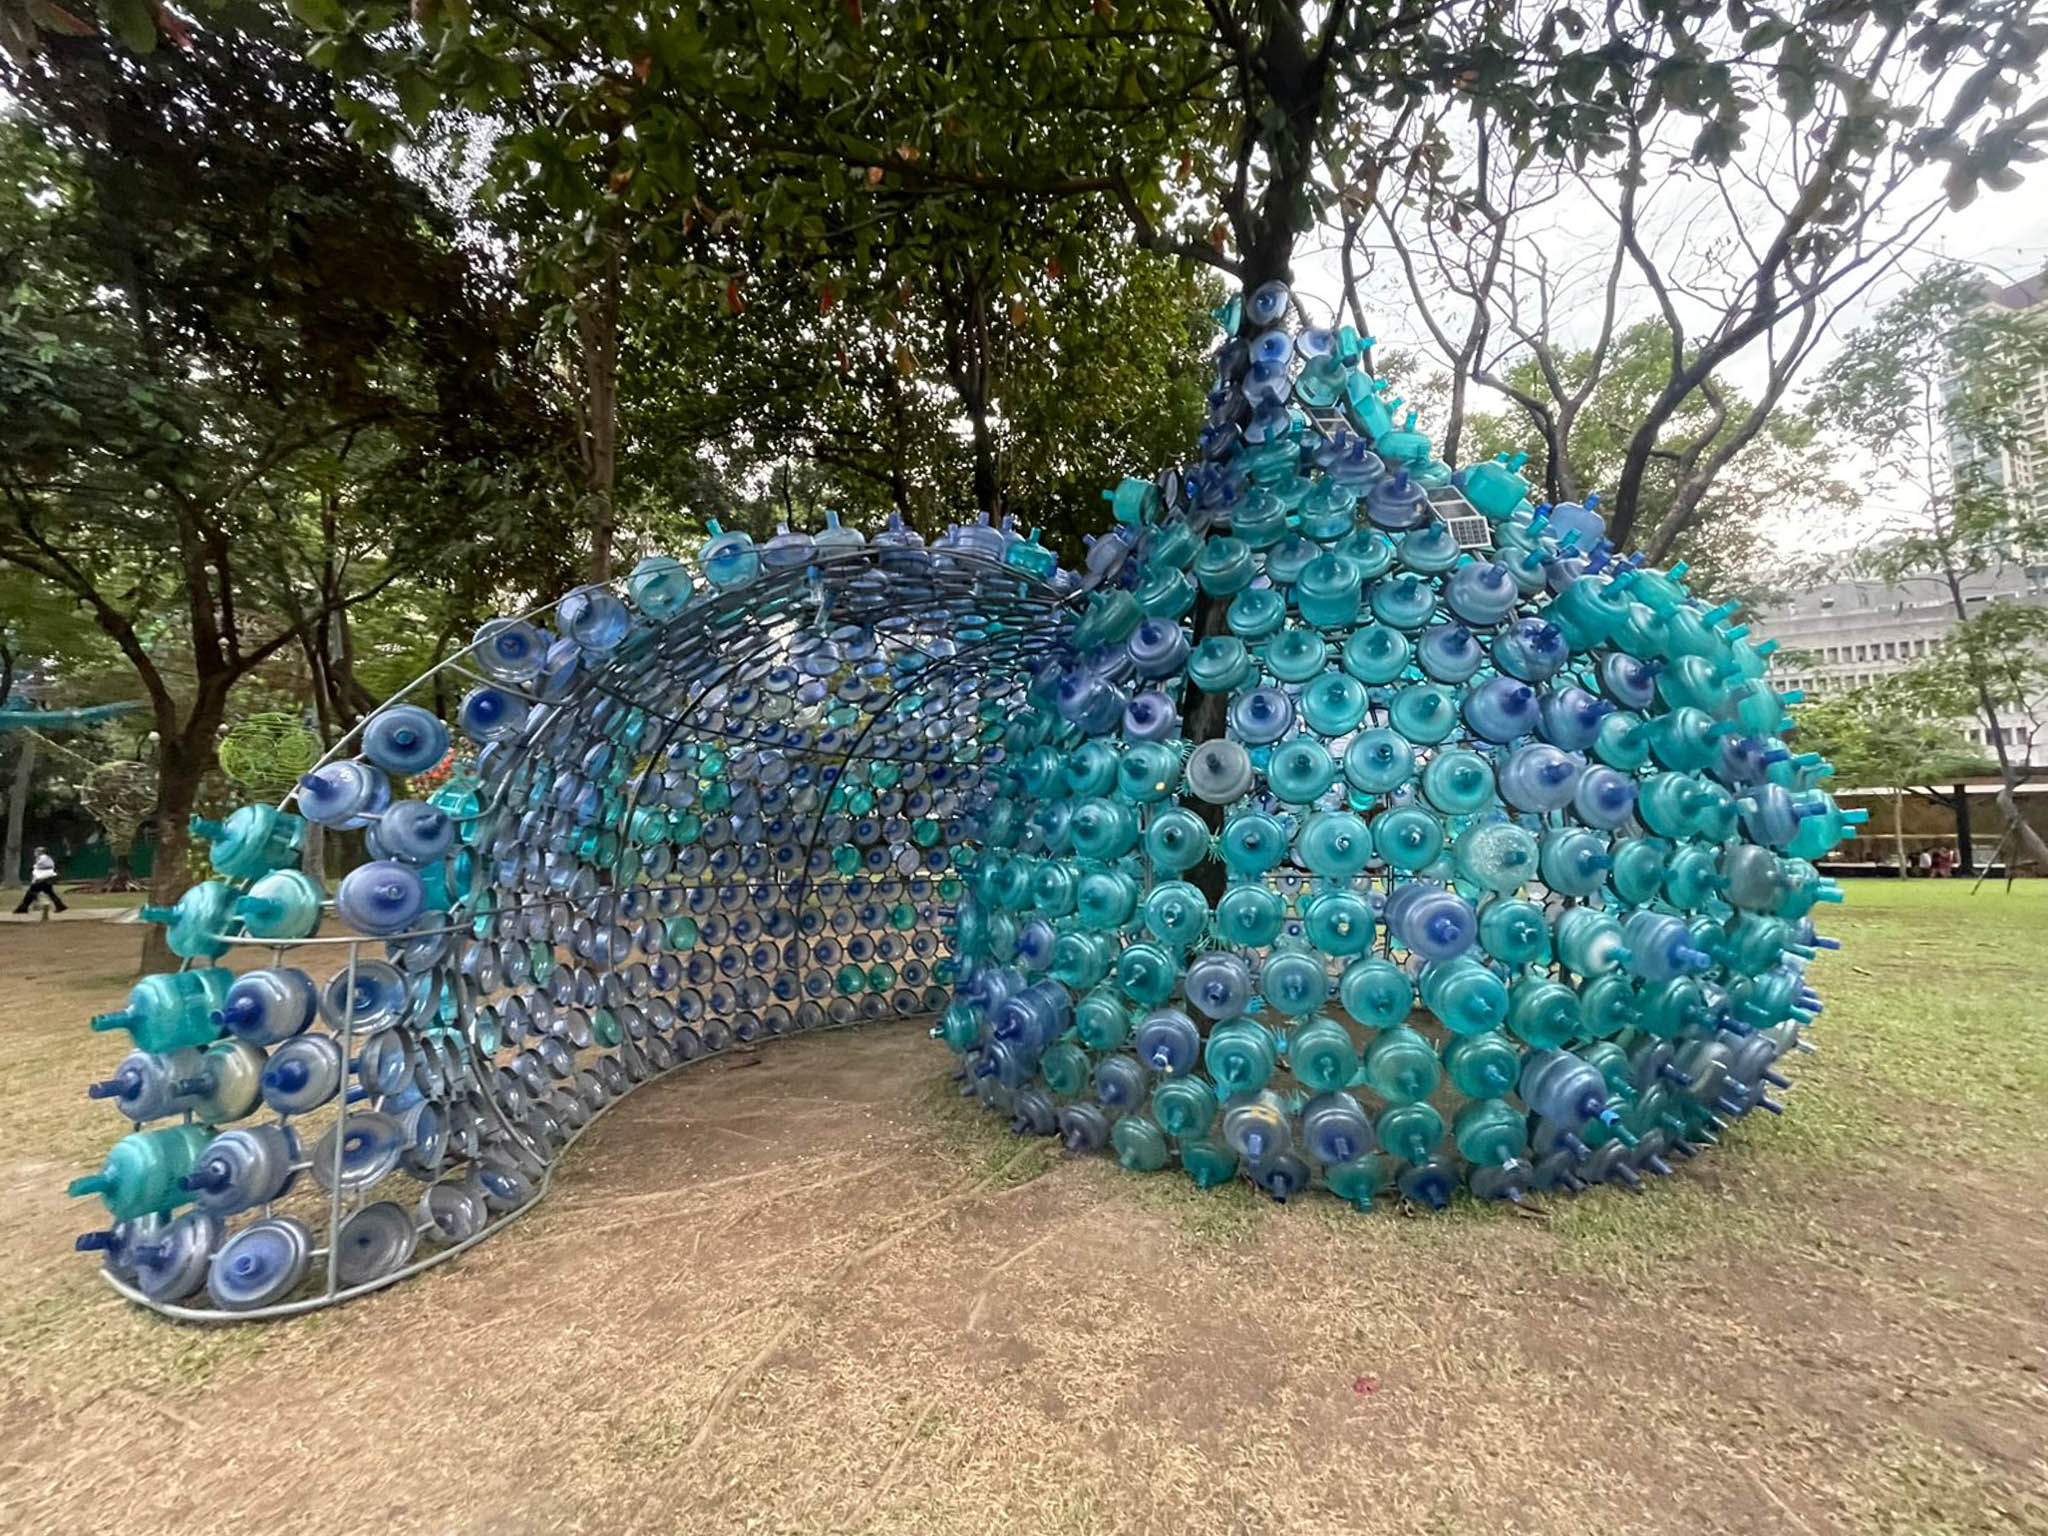 Leeroy New's Nautilus of Dreams art installation made with recycled materials and sustainable lighting